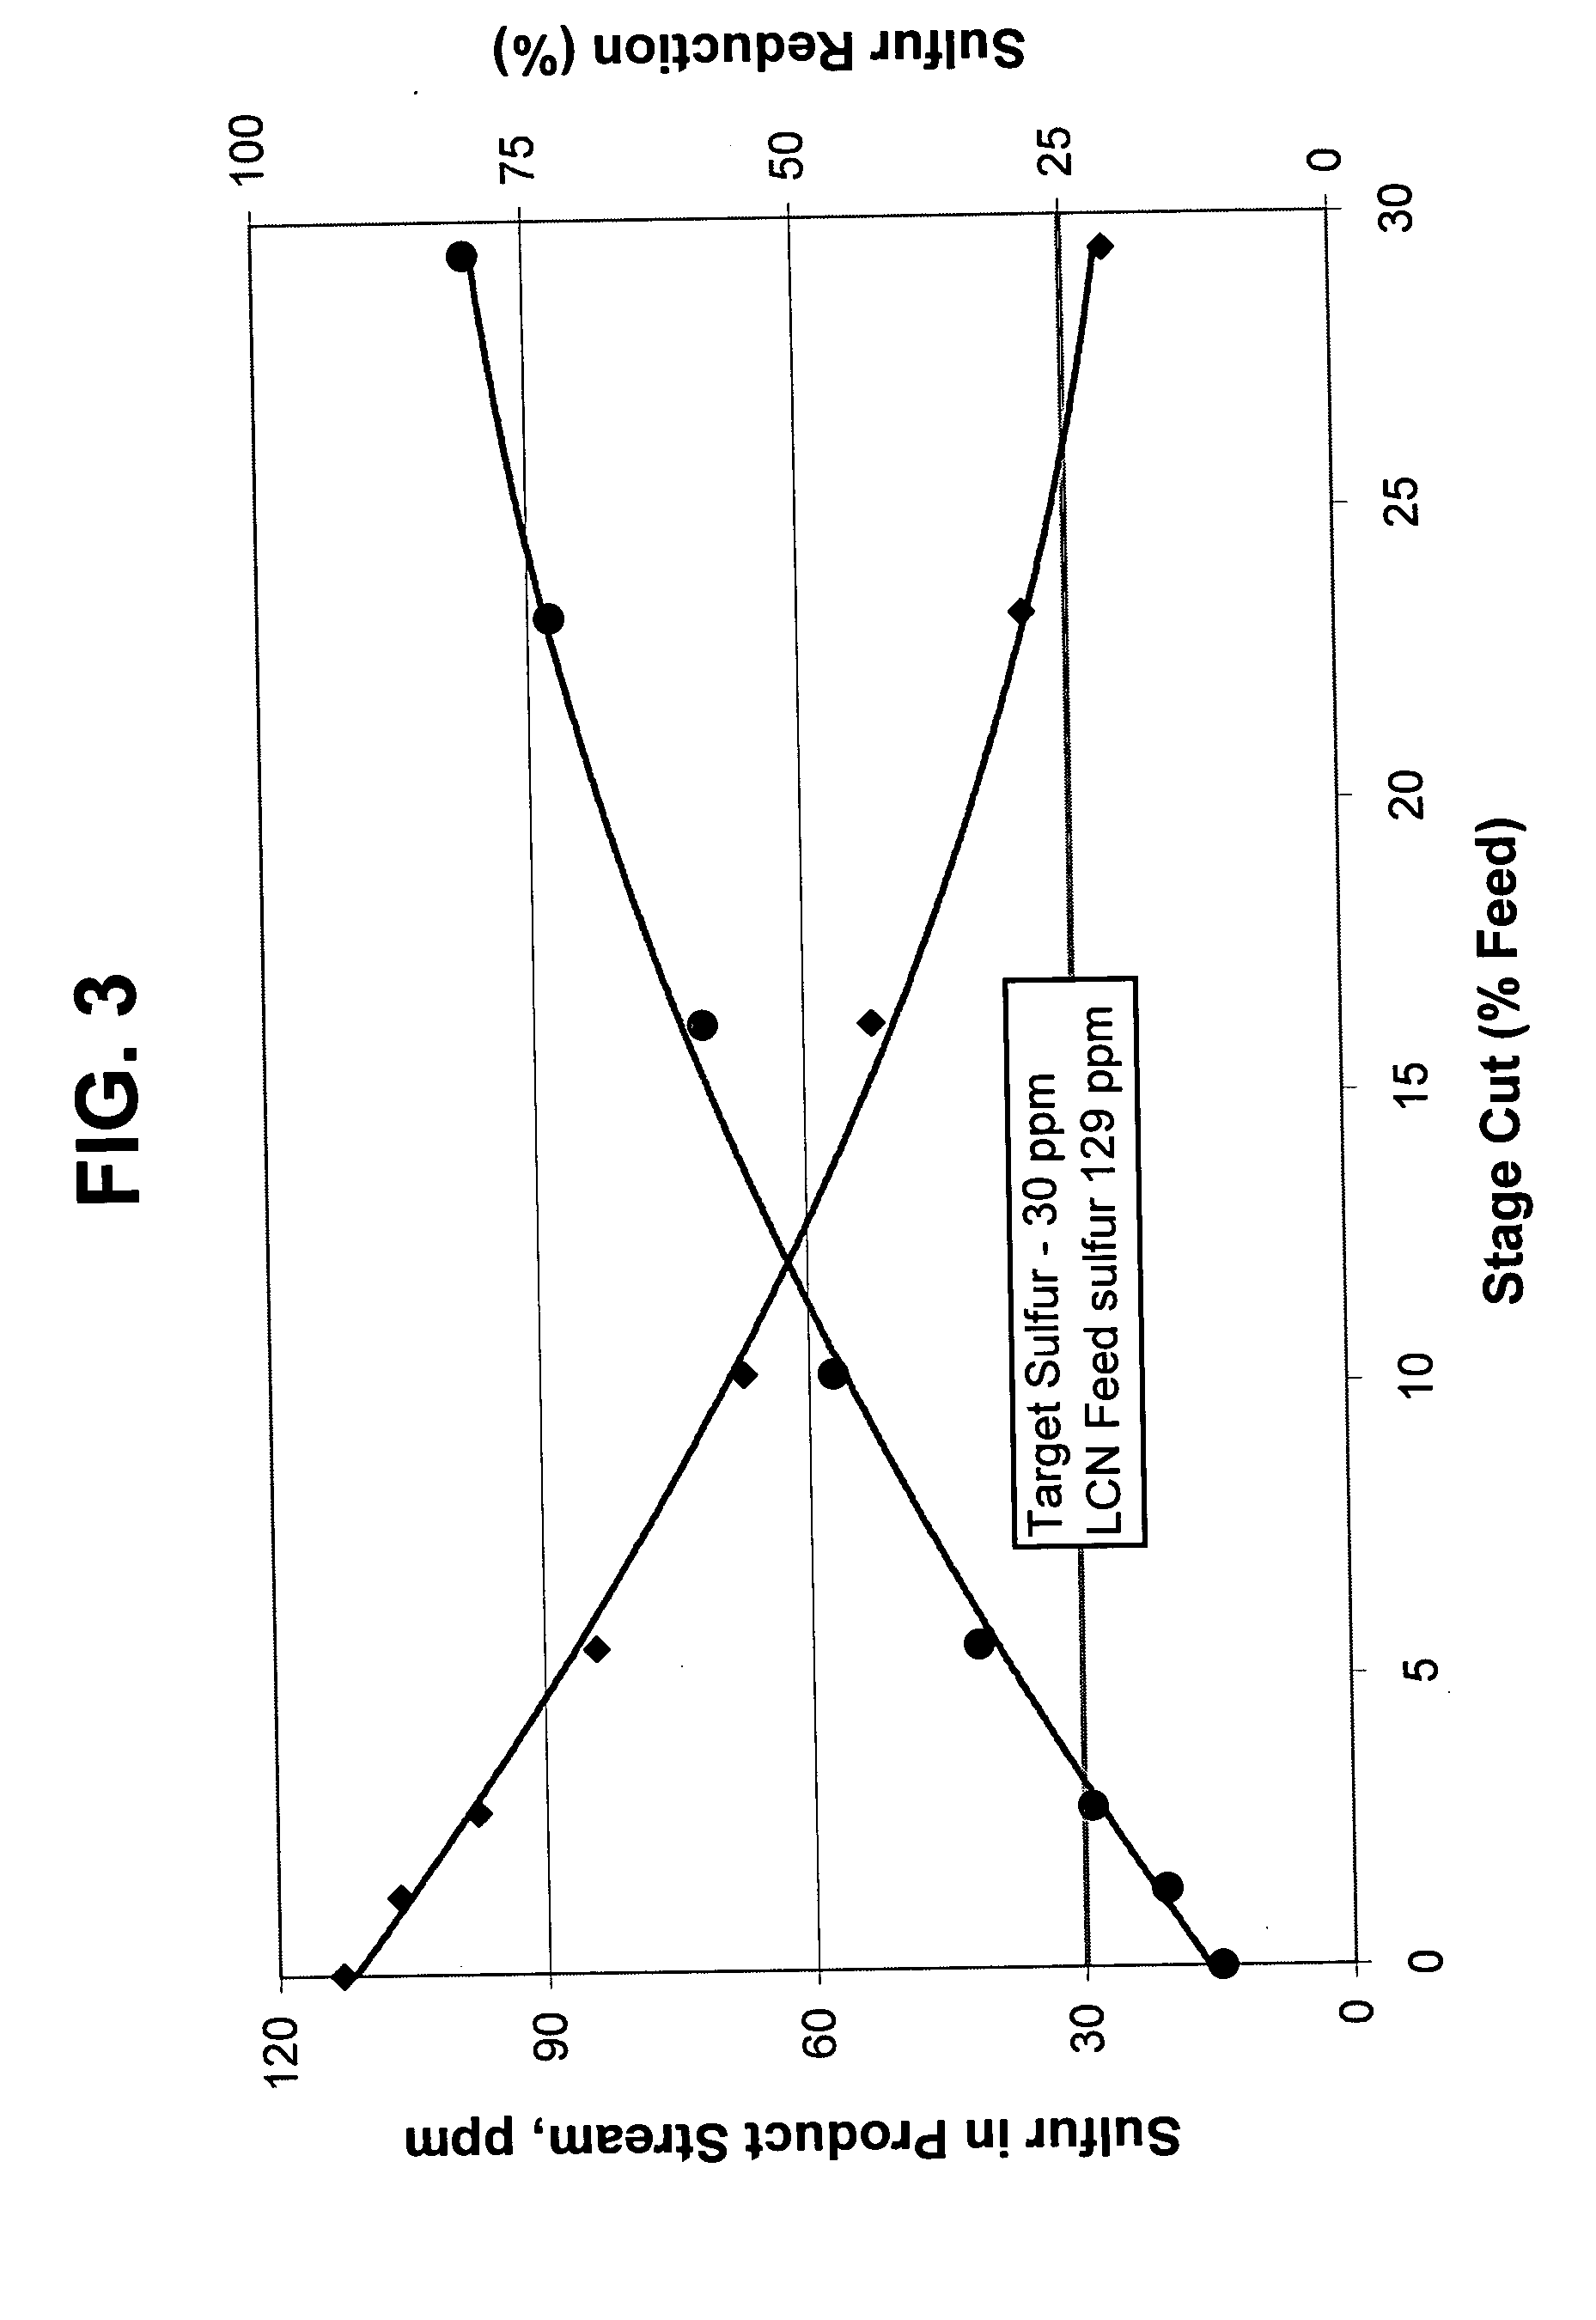 Method of reducing sulfur in hydrocarbon feedstock using a membrane separation zone